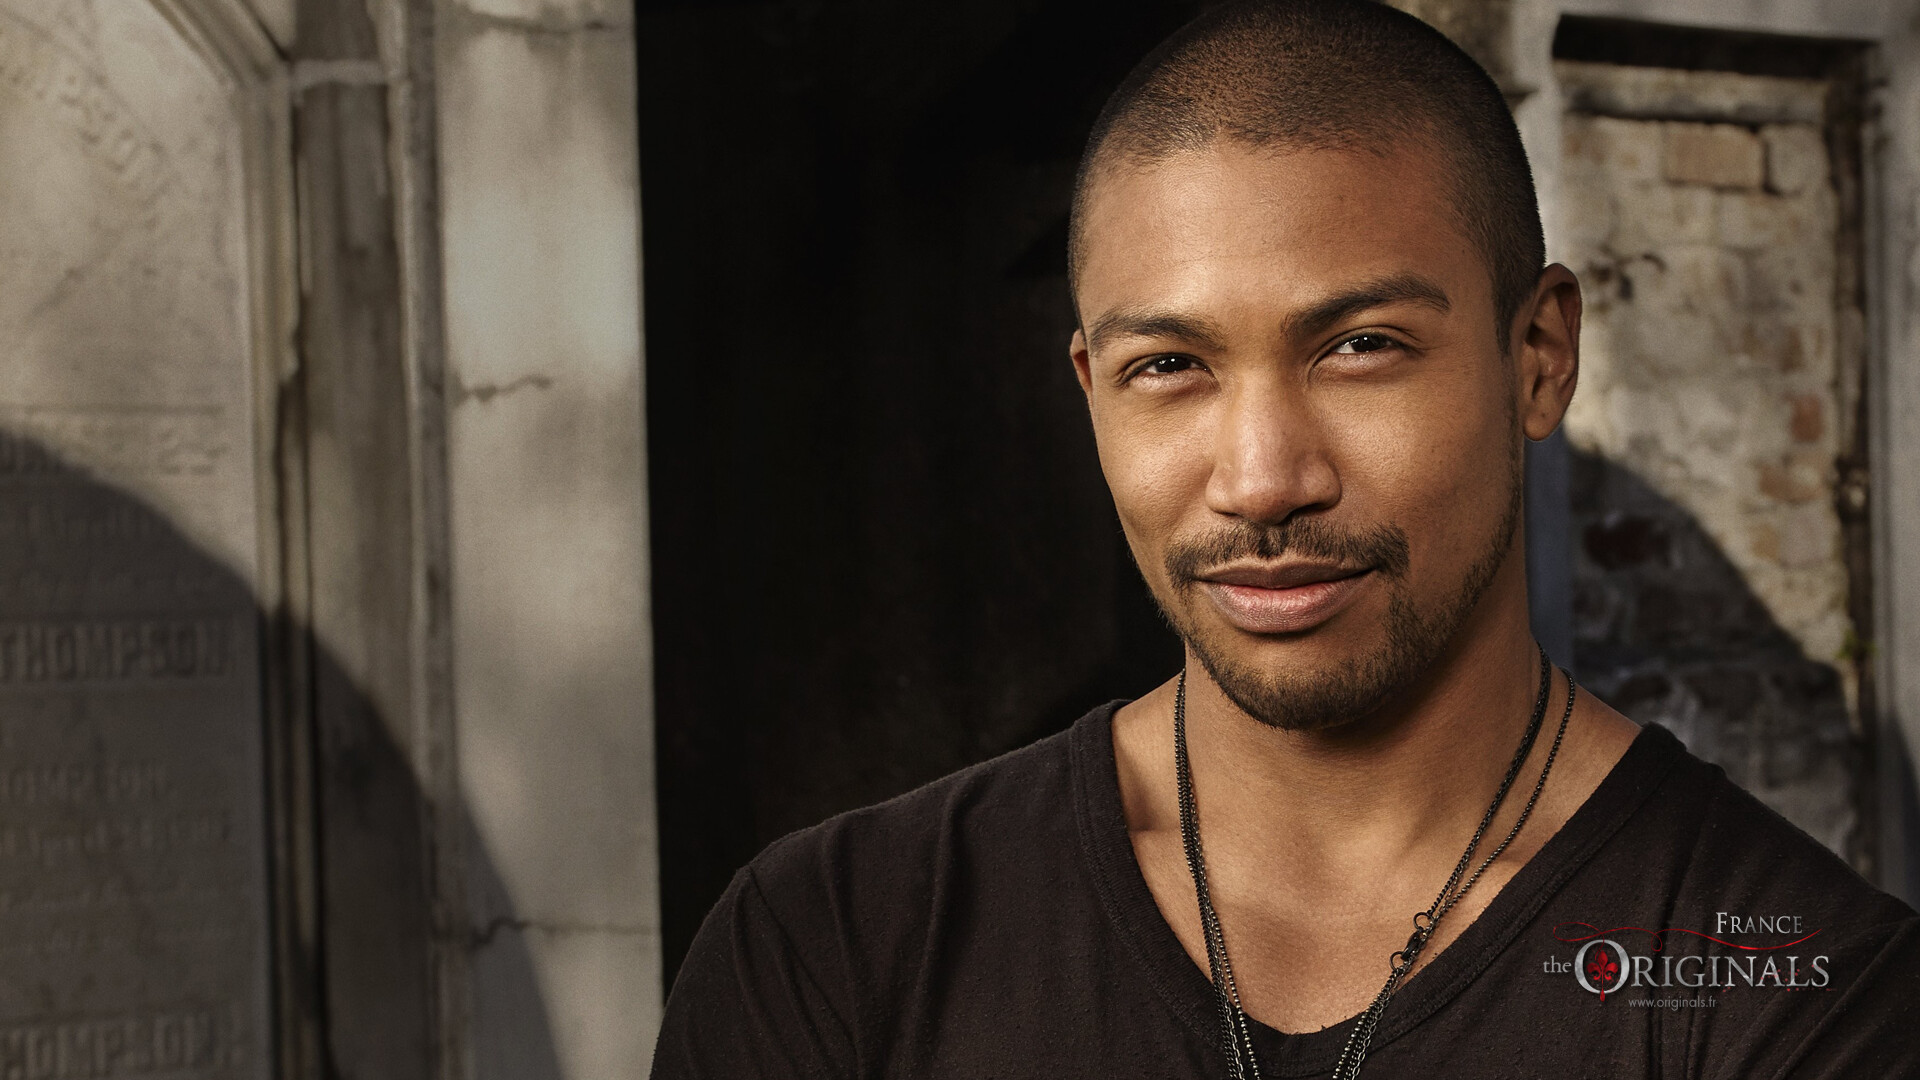 The Originals (TV Series): Charles Michael Davis as Marcel Gerard, The adoptive son and former protege of Niklaus Mikaelson. 1920x1080 Full HD Wallpaper.